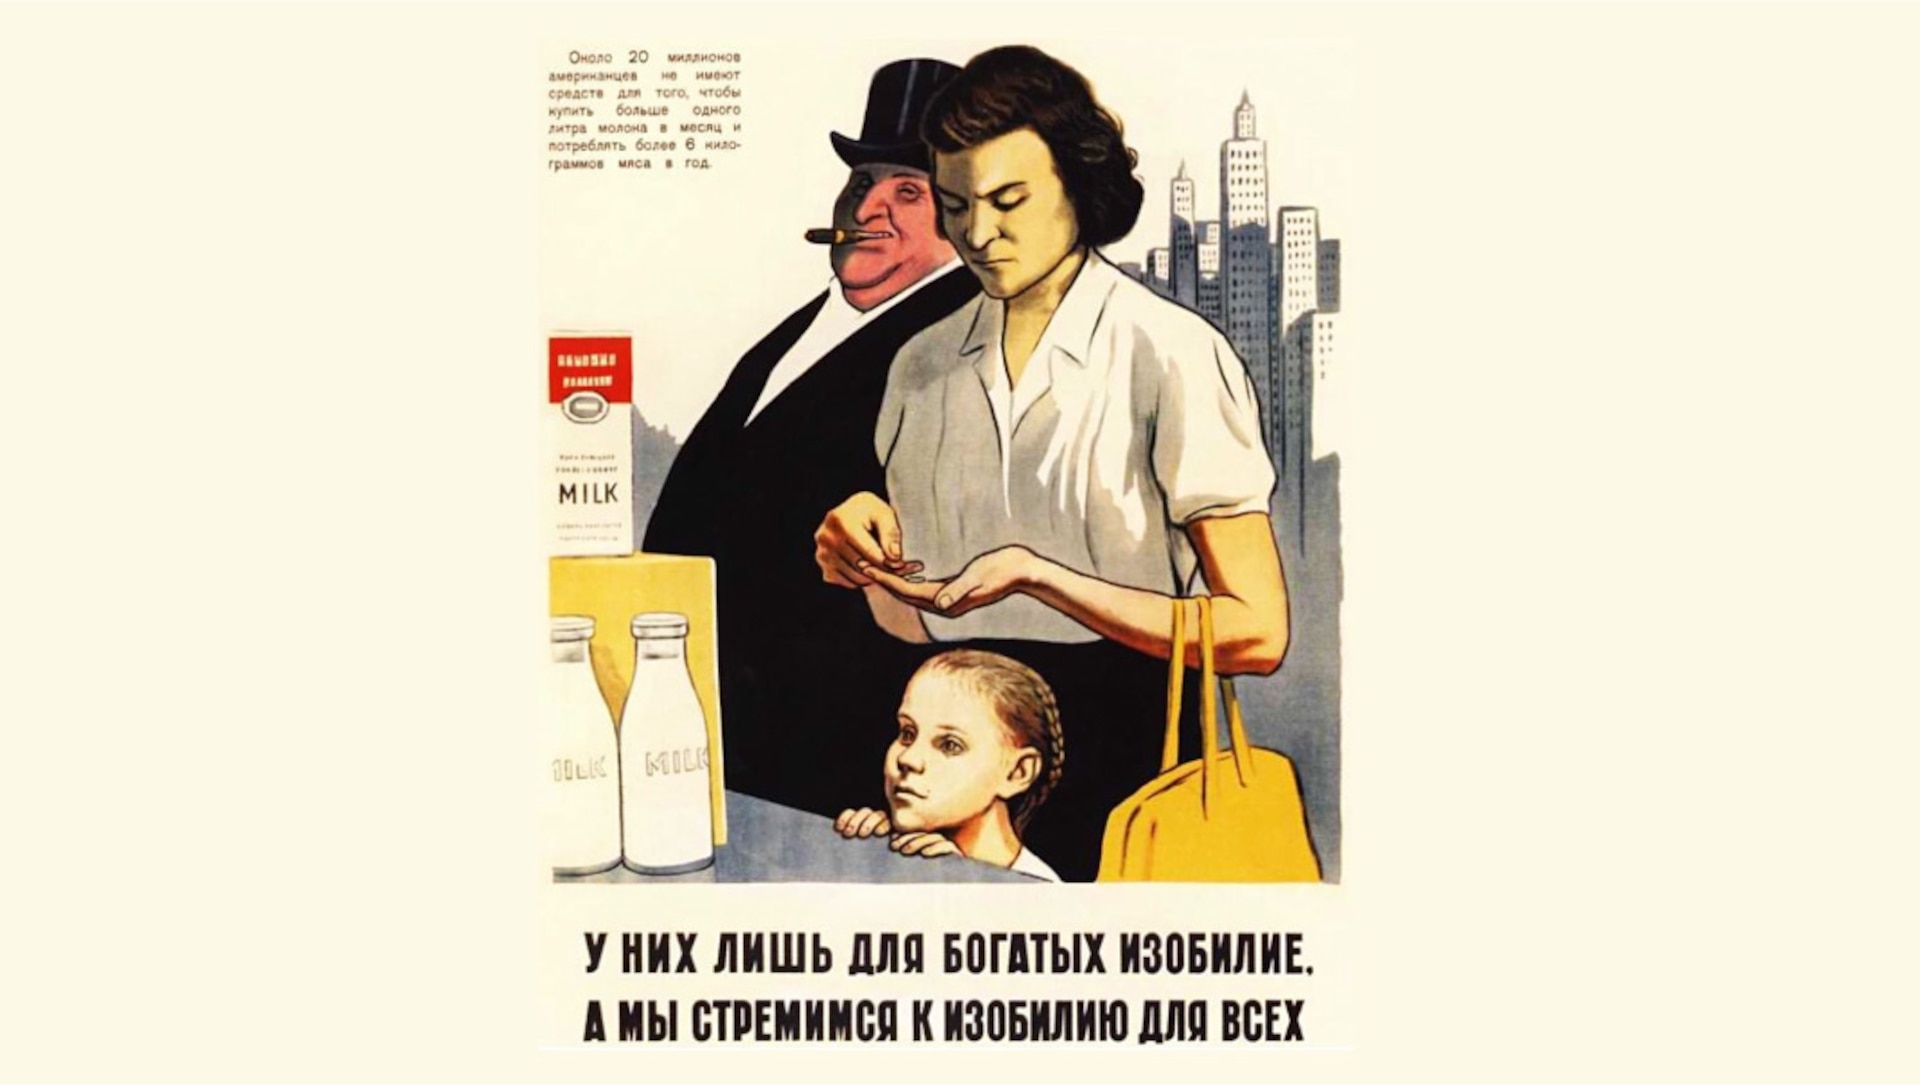 A poster with Russian text that depicts an illustration of a woman counting change in her hand as a small girl peers over a counter. The counter contains bottles and cartons of milk. A large man wearing a suit and top hat and smoking a cigar looks on from the background.